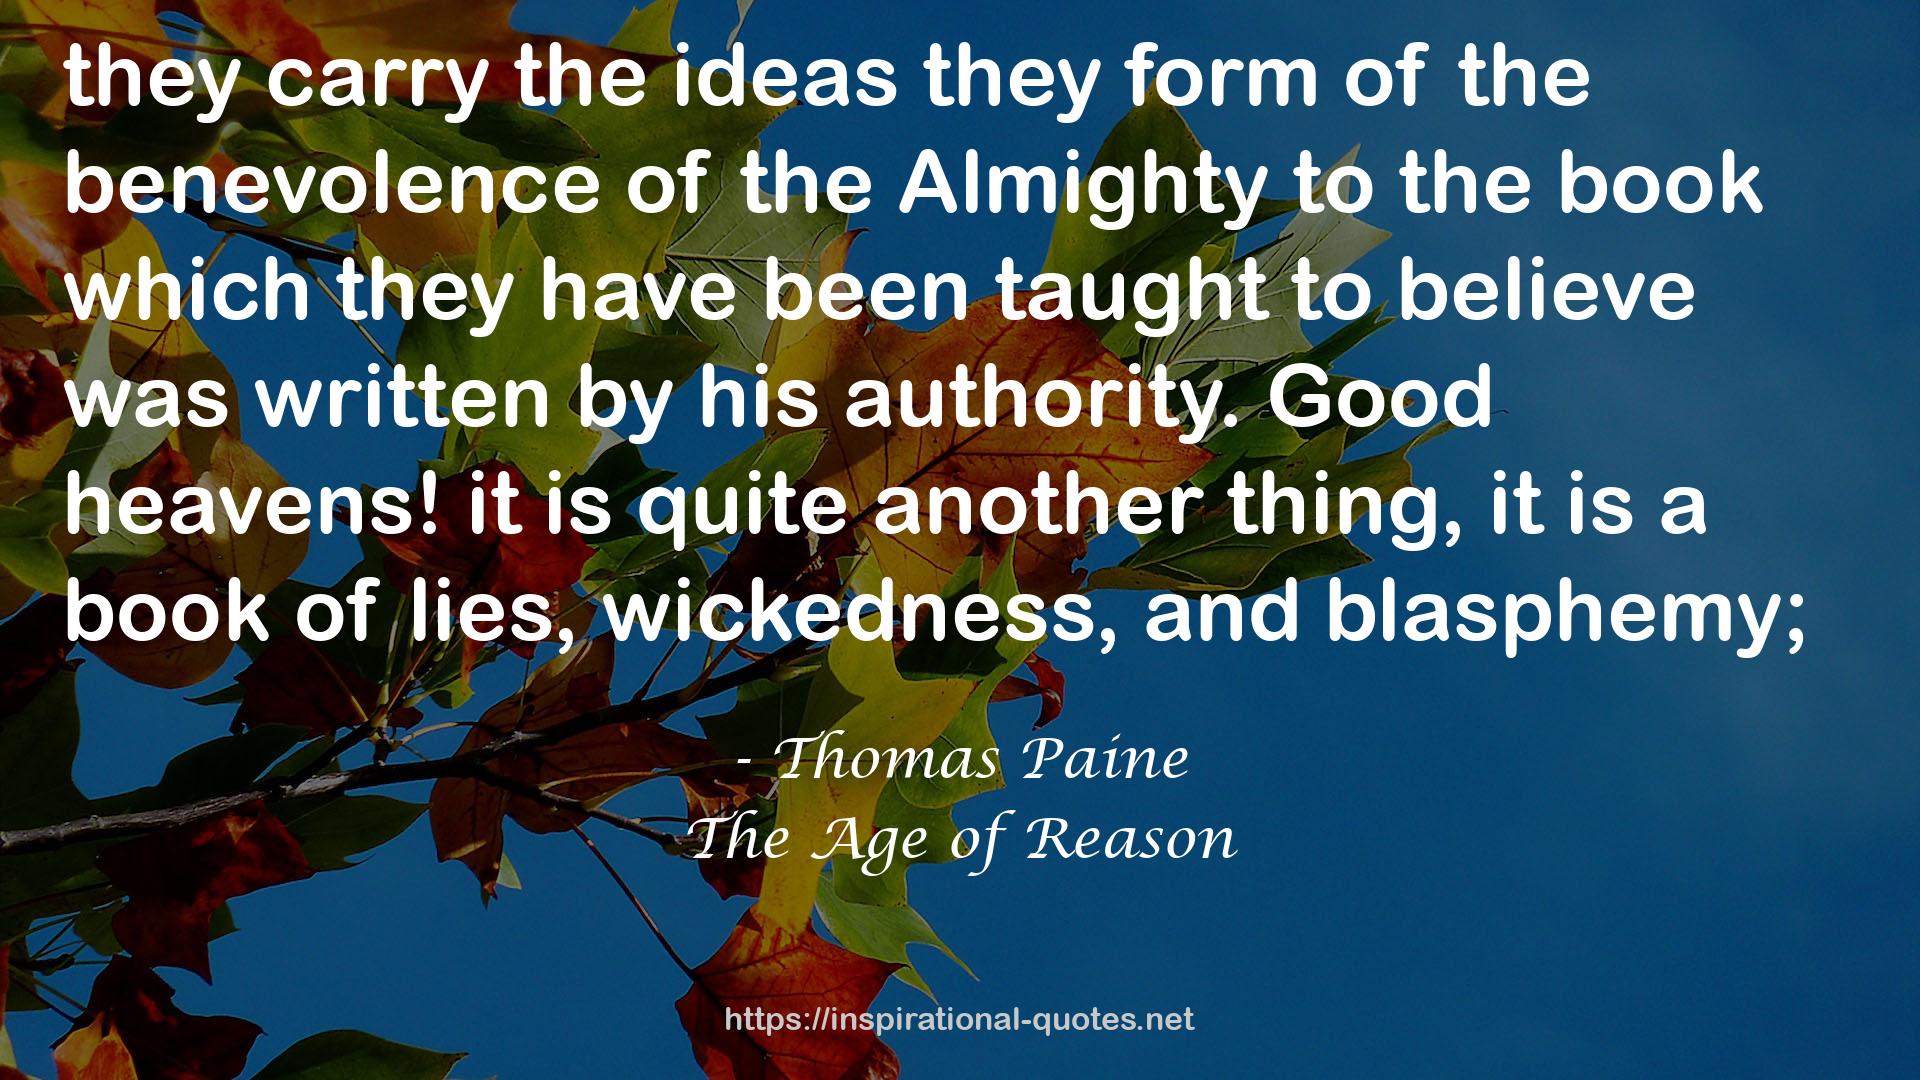 The Age of Reason QUOTES